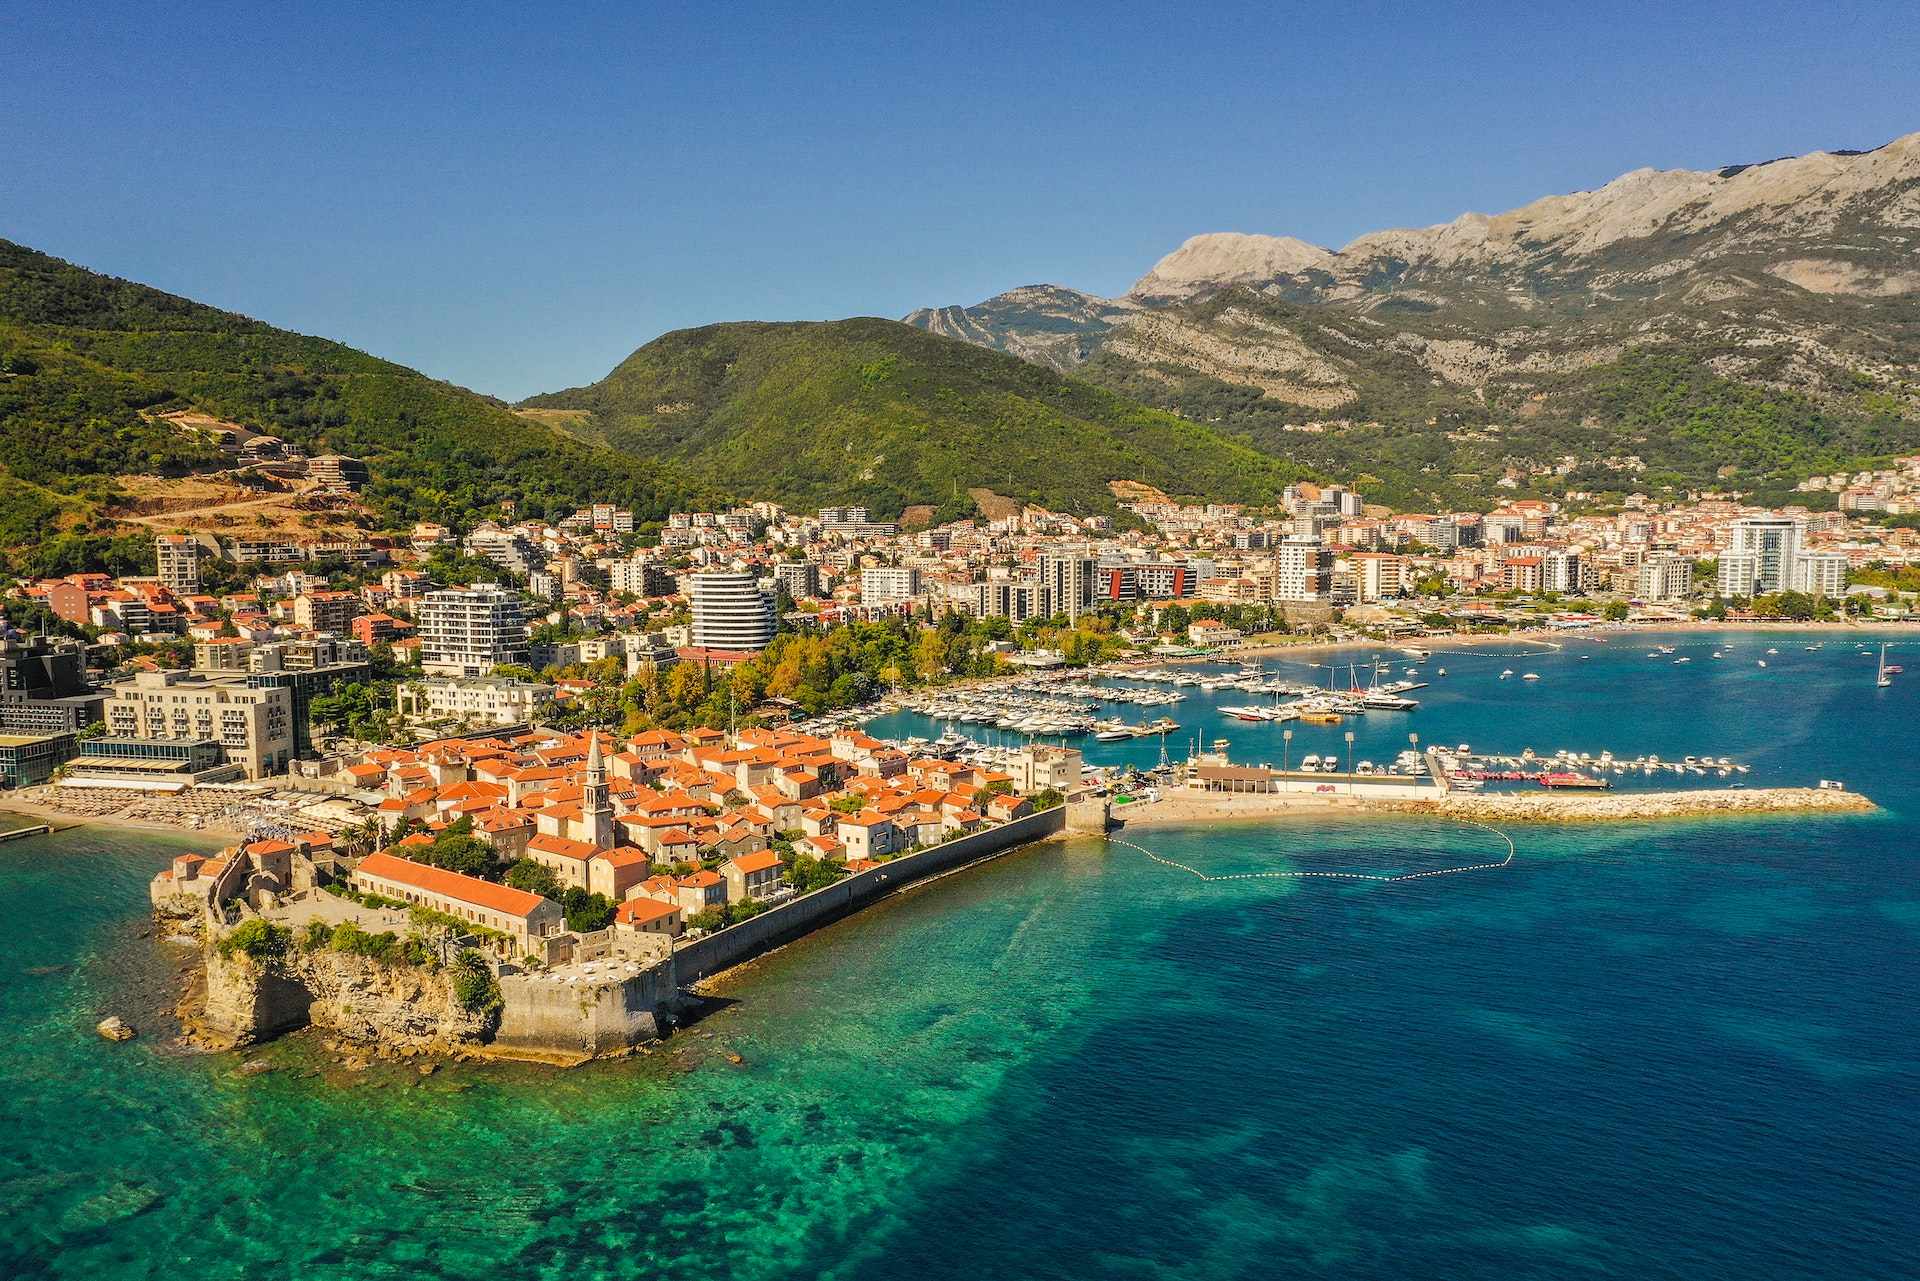 Budva Bucket List: 8 Attractions You Must See